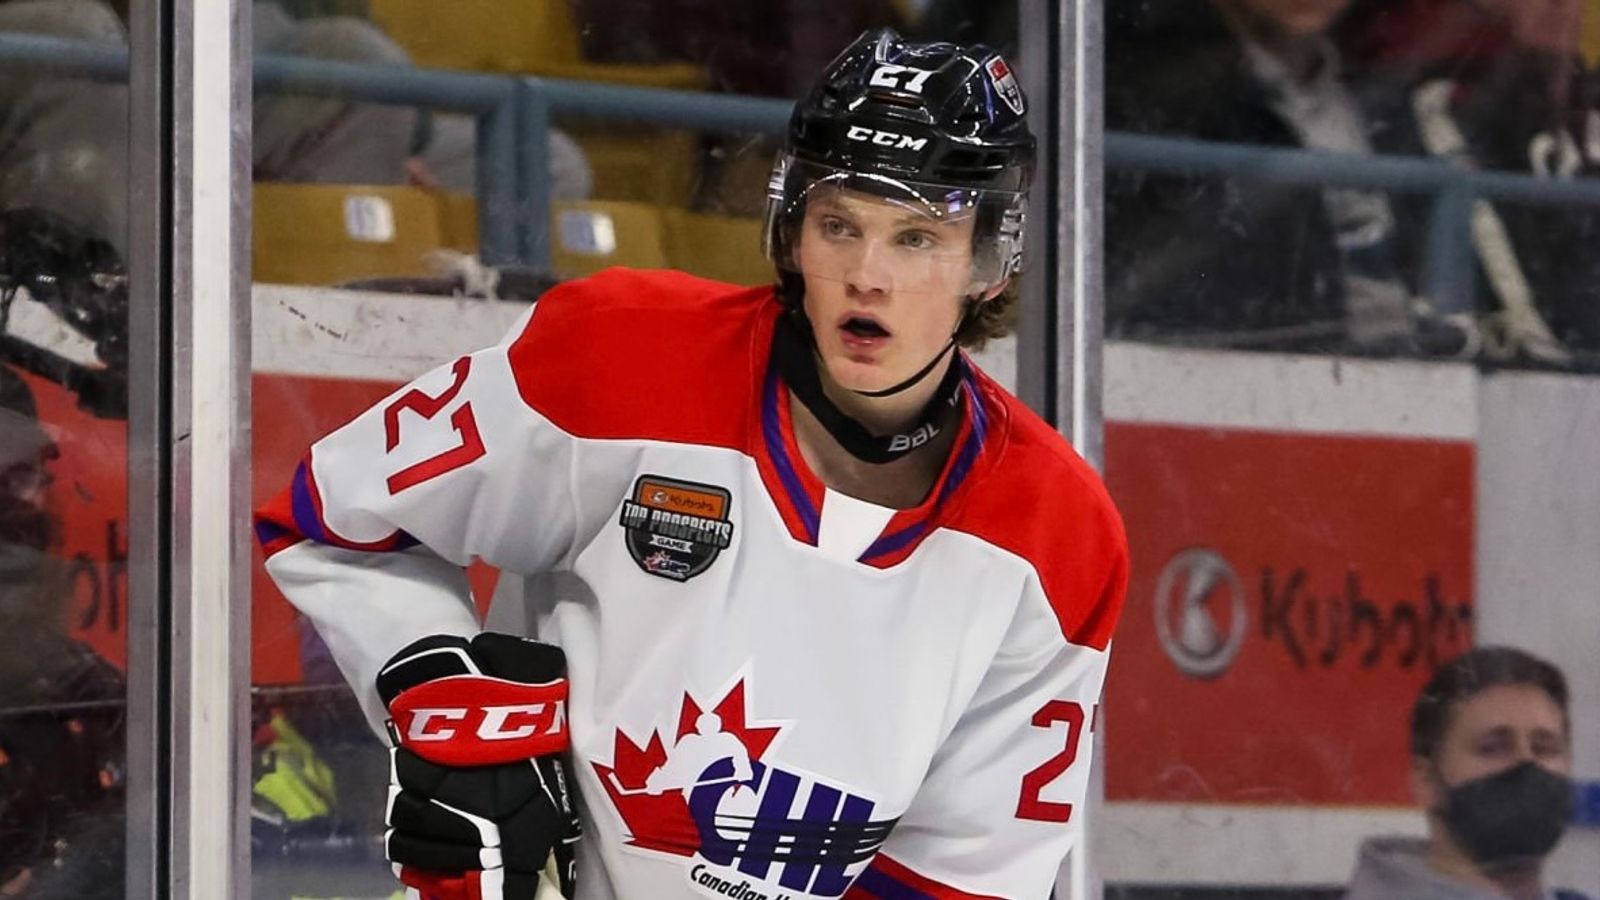 Team Canada Finalizes World Junior Championship Roster - The